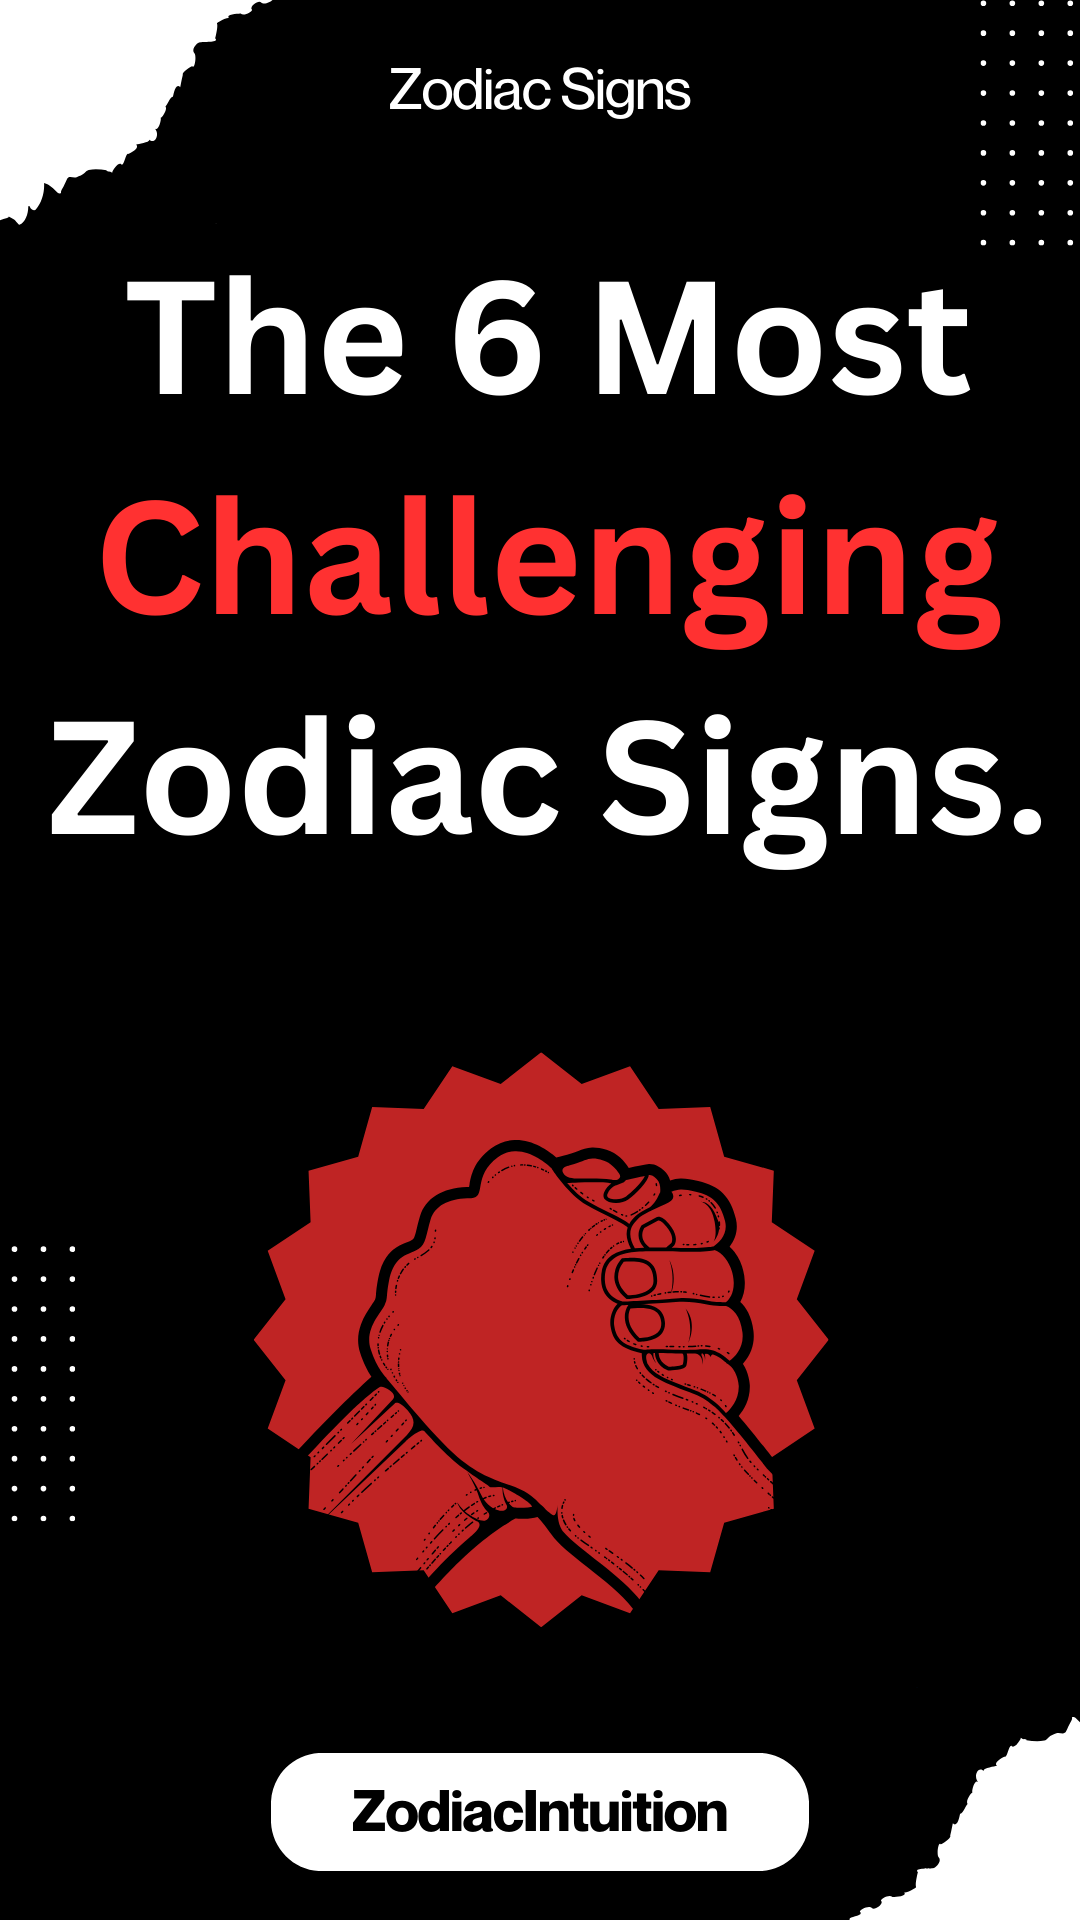 The 6 Most Challenging Zodiac Signs.